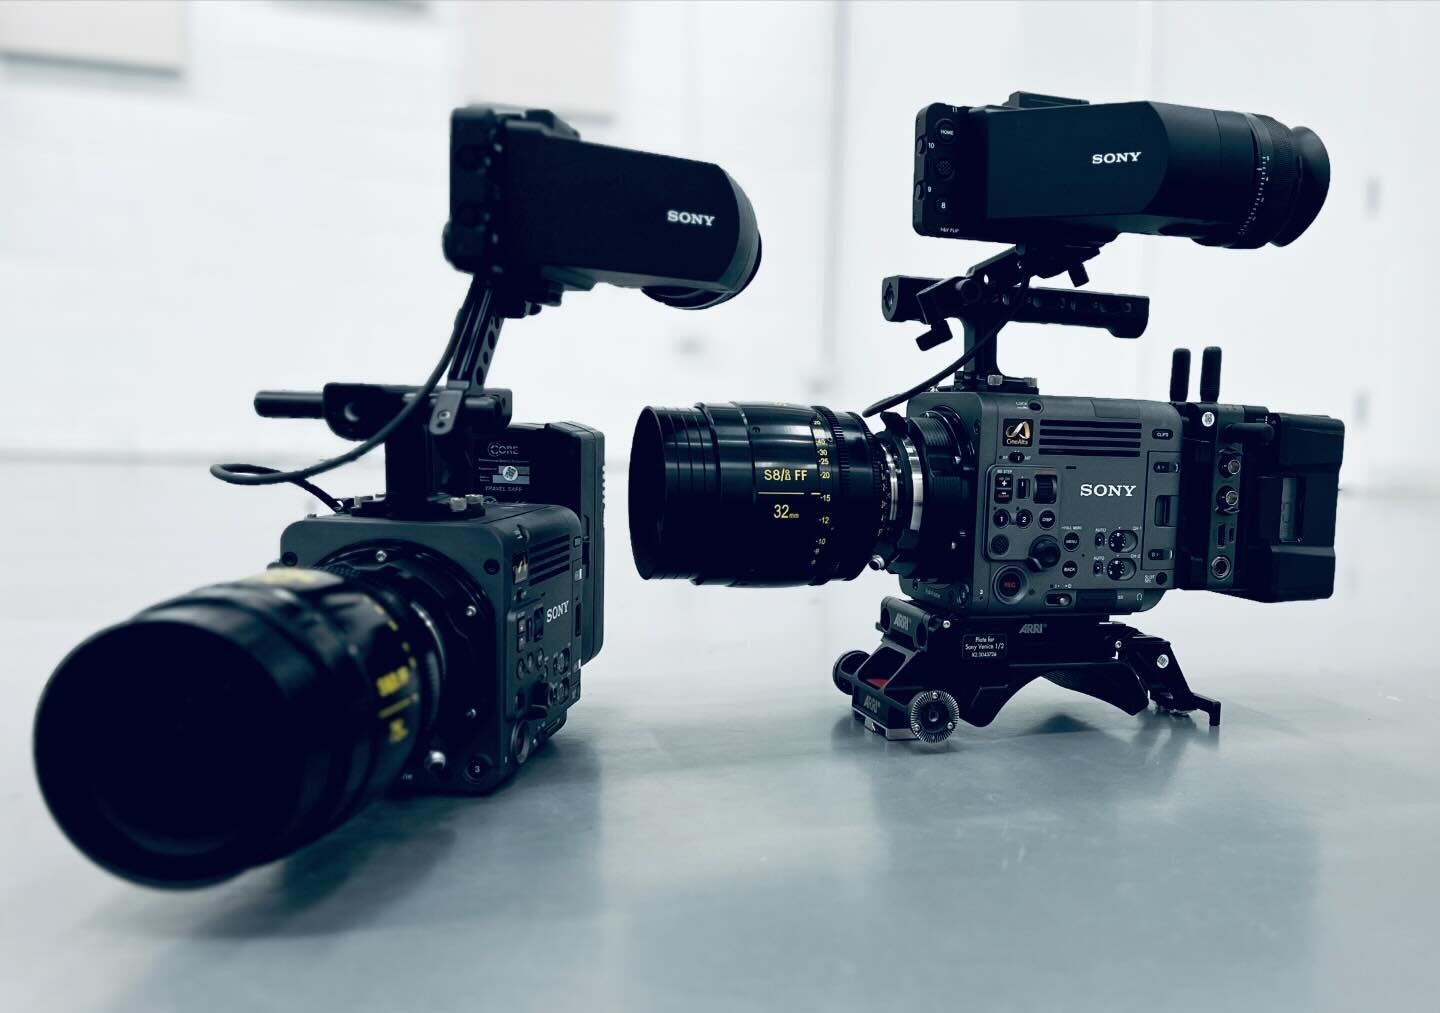 Our Sony Burano cameras have arrived! We&rsquo;re going Arri Cage, we have the extension grip for both, and plenty of media. It&rsquo;s small, with just the right amount of weight for handheld work. EVF is kinda odd, but the image is better than I ex